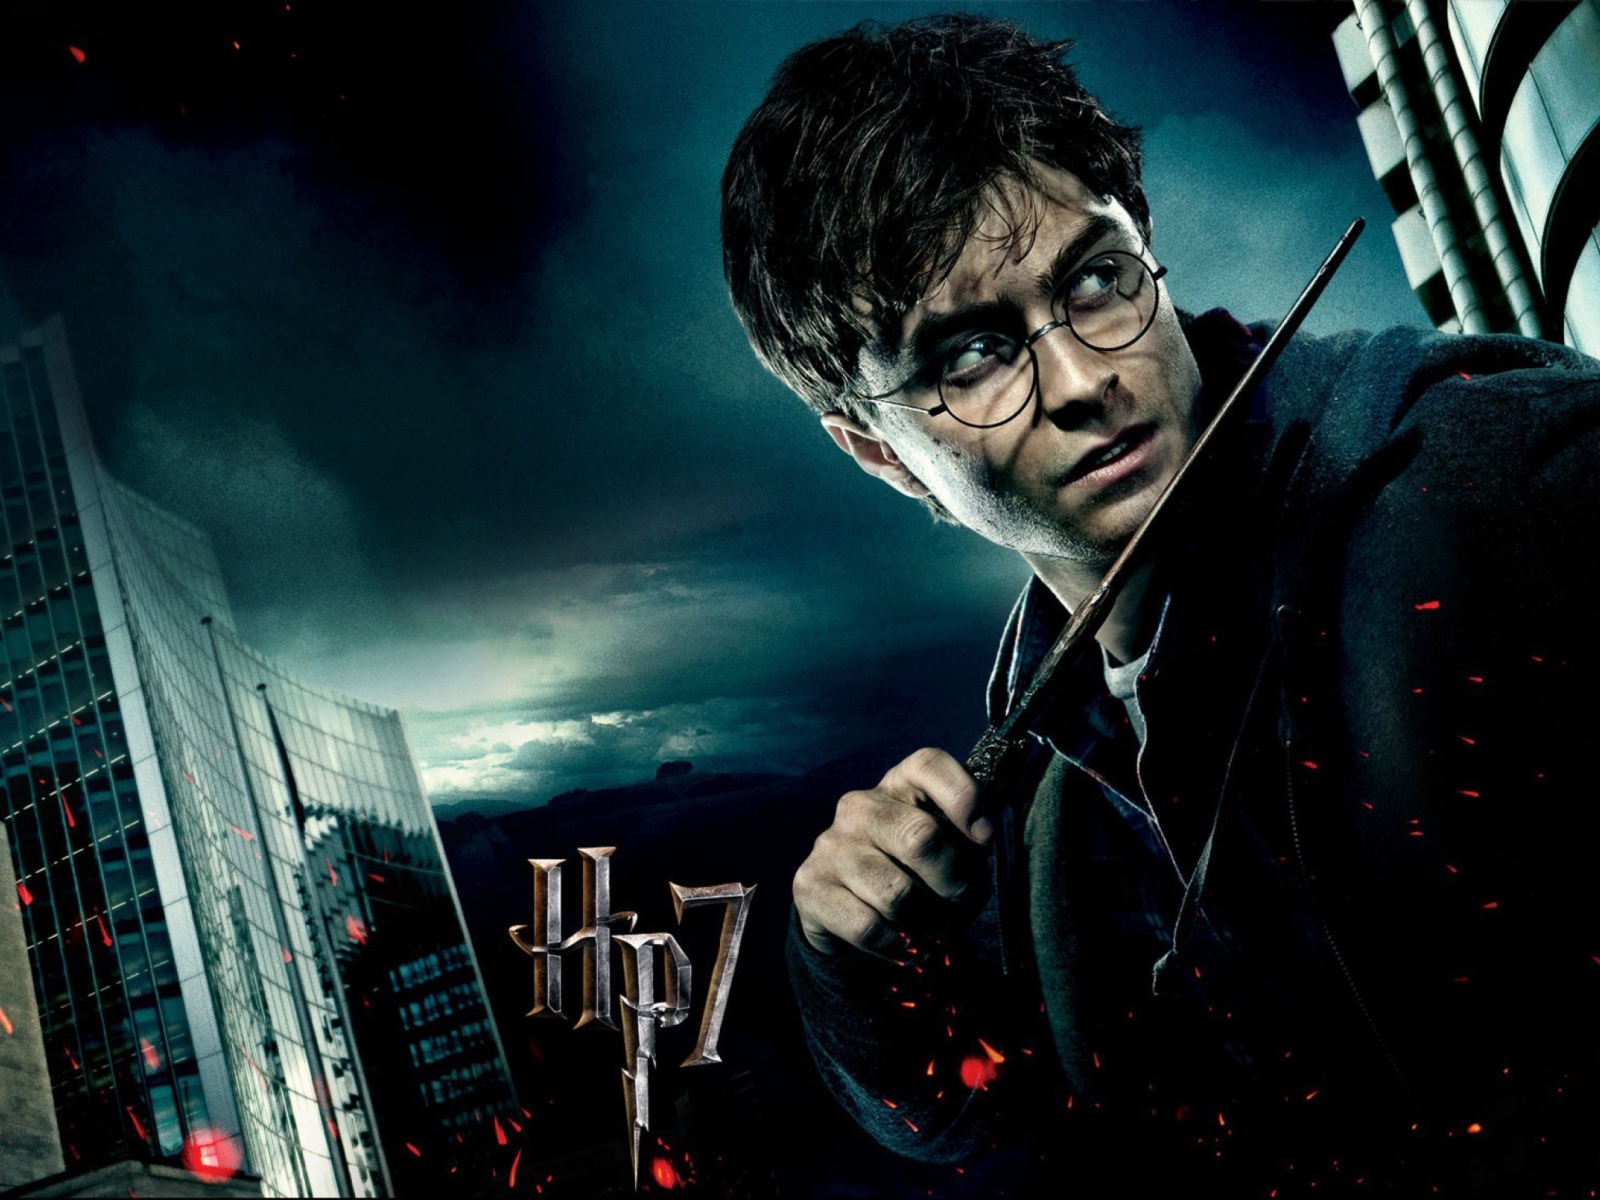 Harry Potter And The Deathly Hallows Part-1 wallpaper 1600x1200